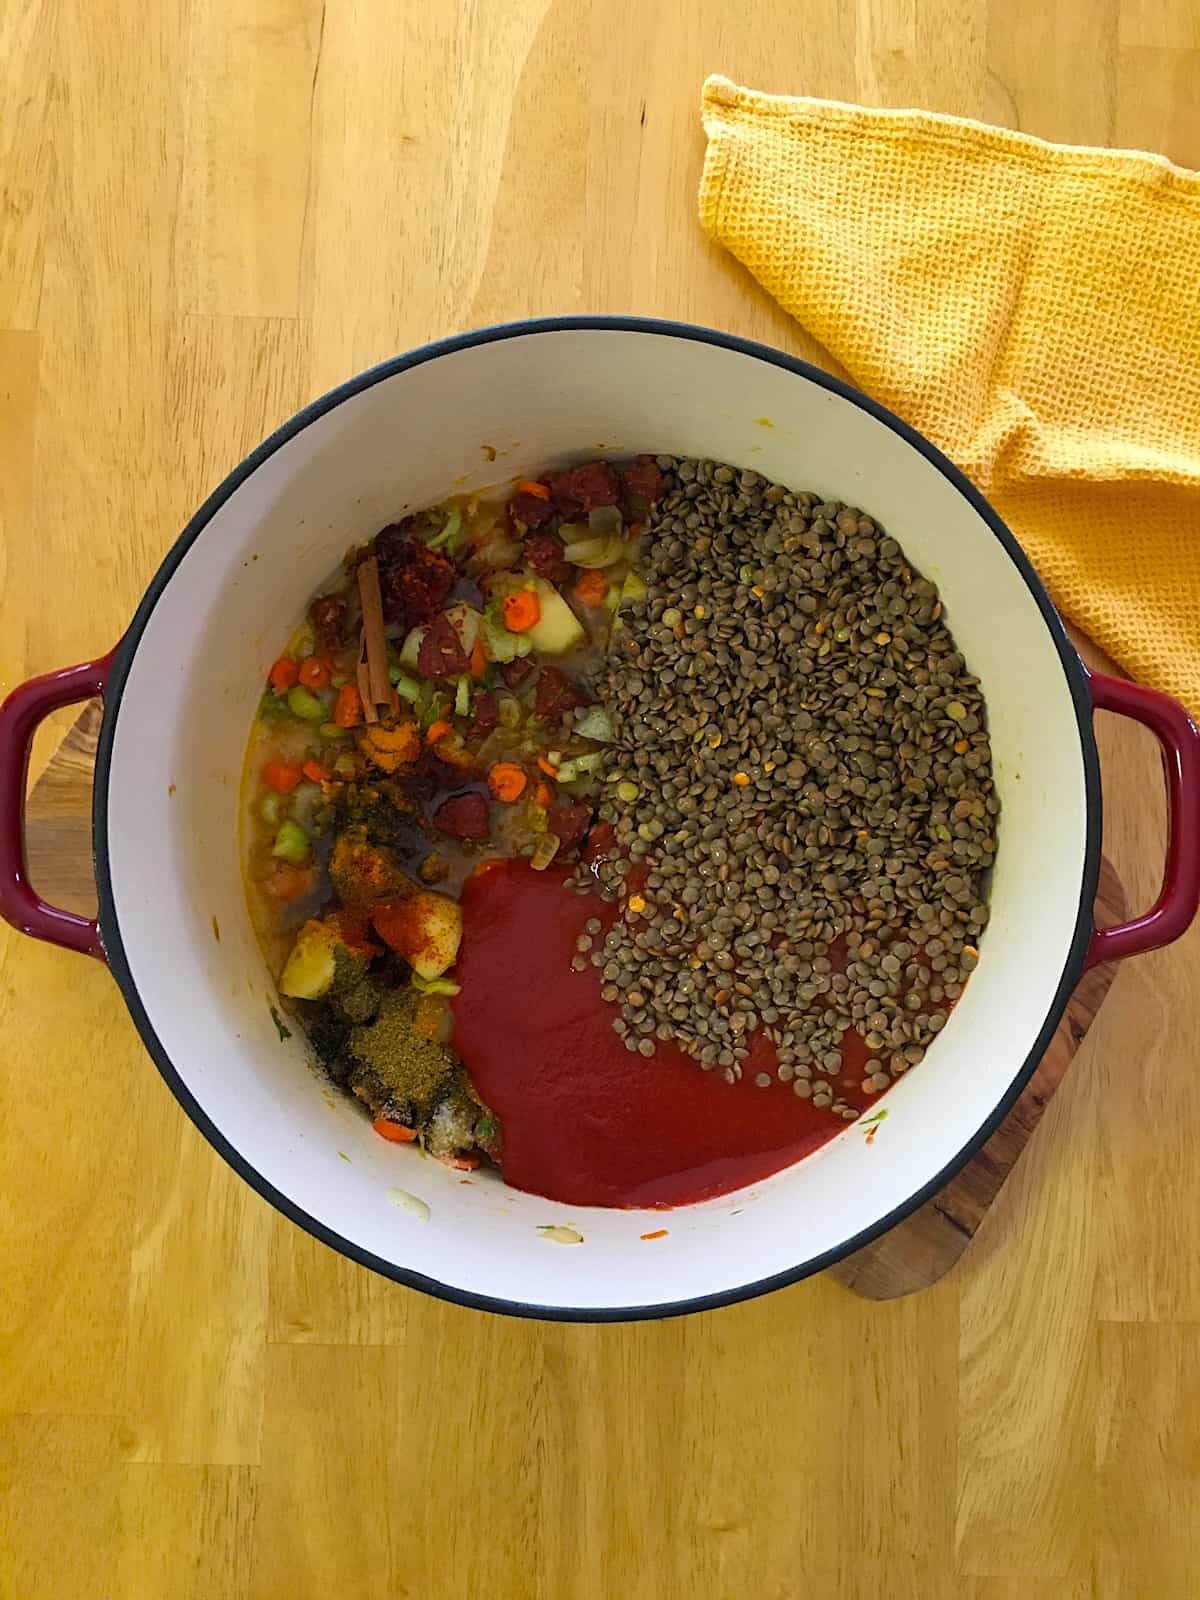 Lentils, crushed tomatoes, spices and herbs added to the cooking pot.